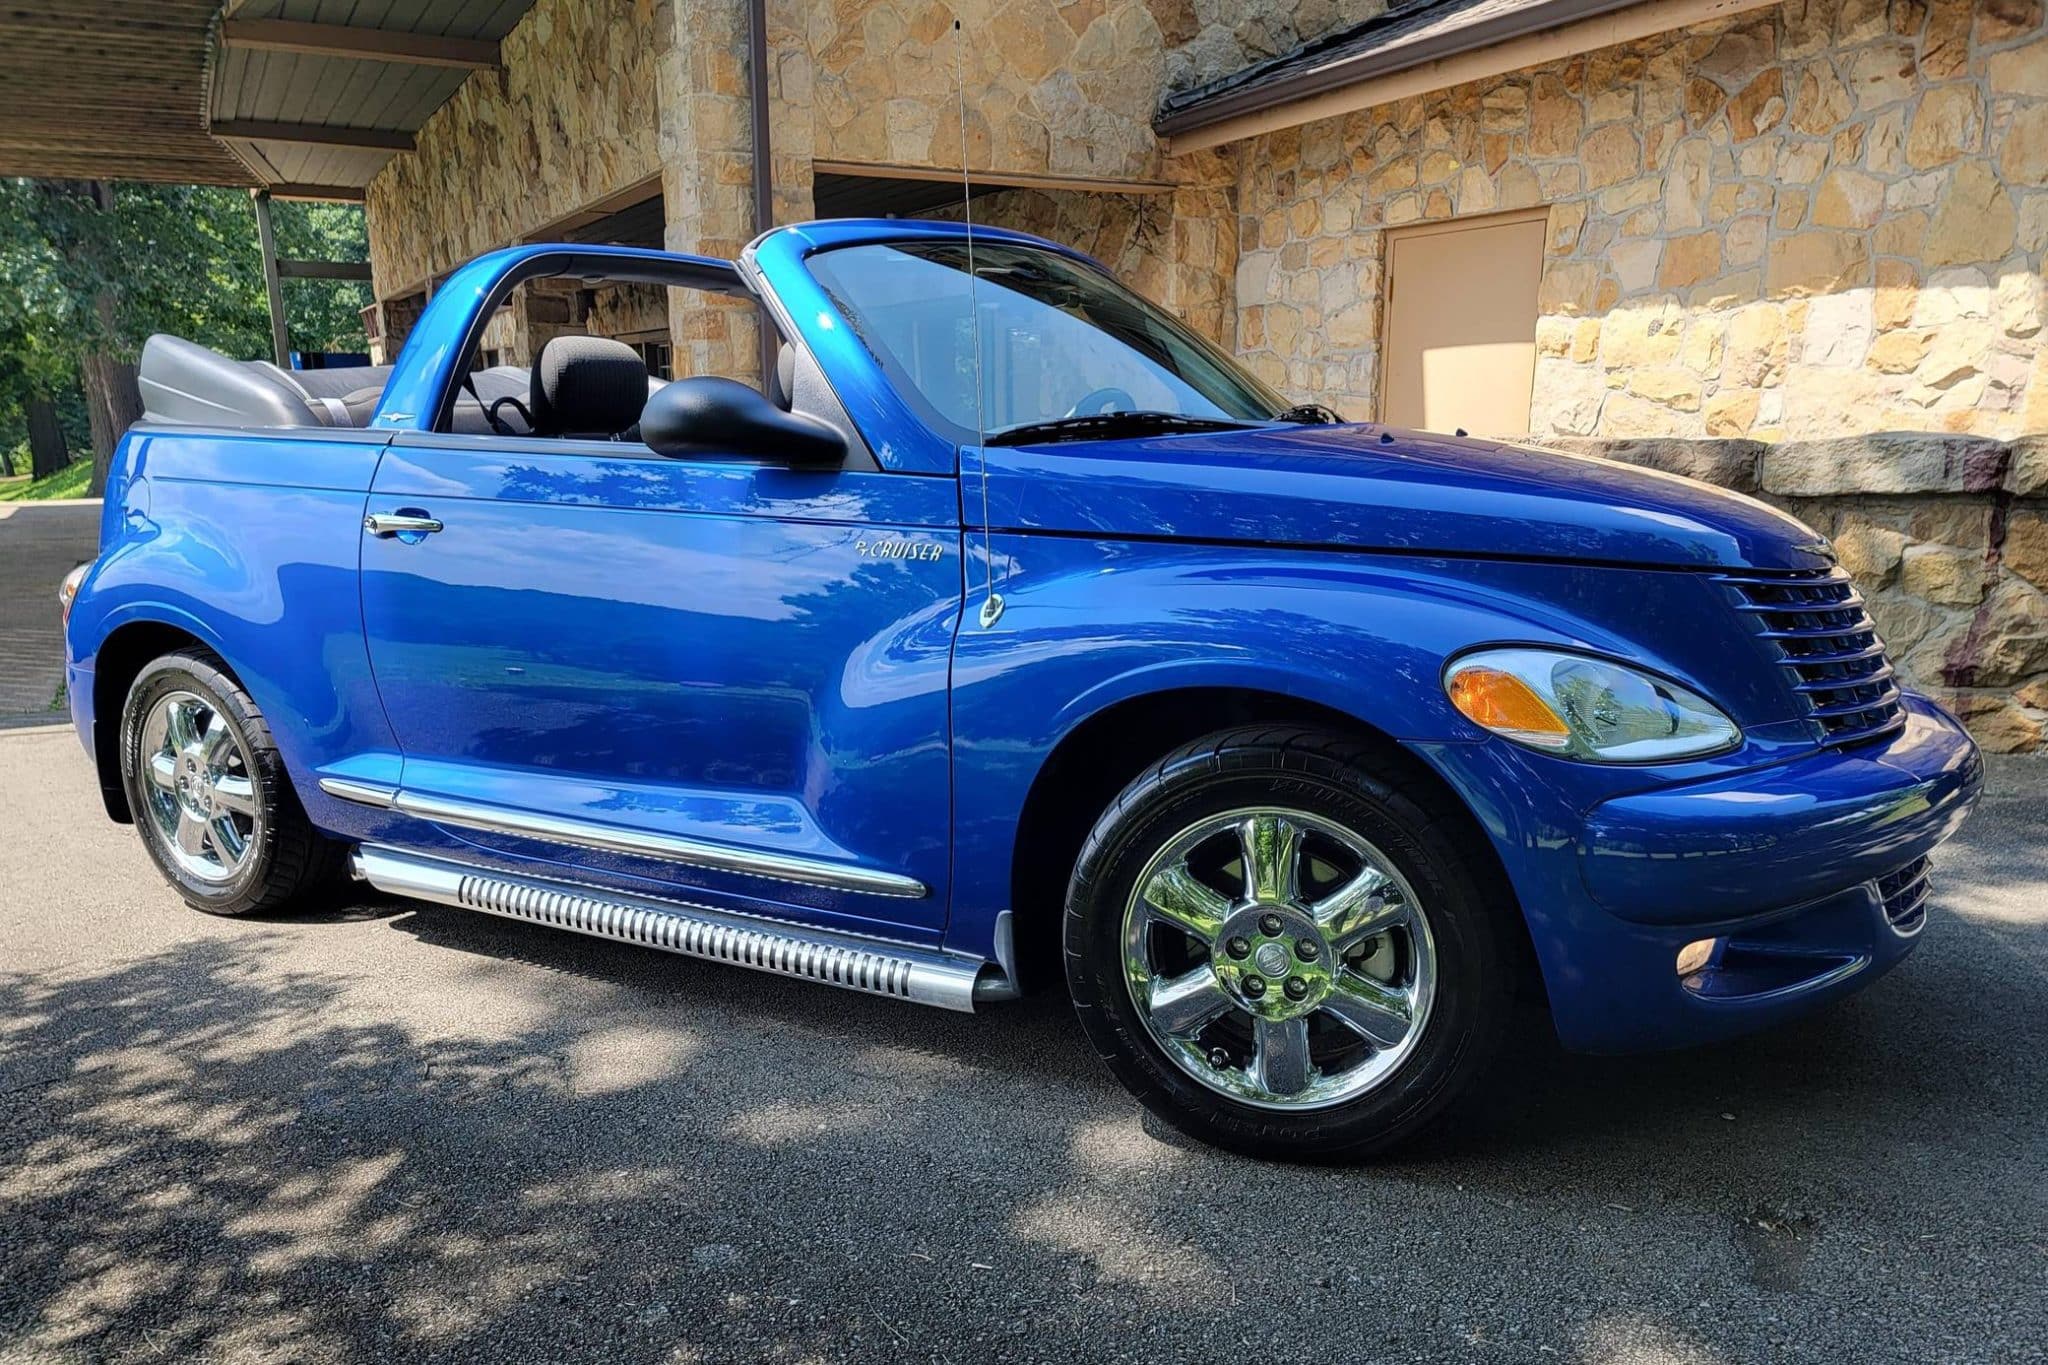 How to Start a PT Cruiser Without Keys